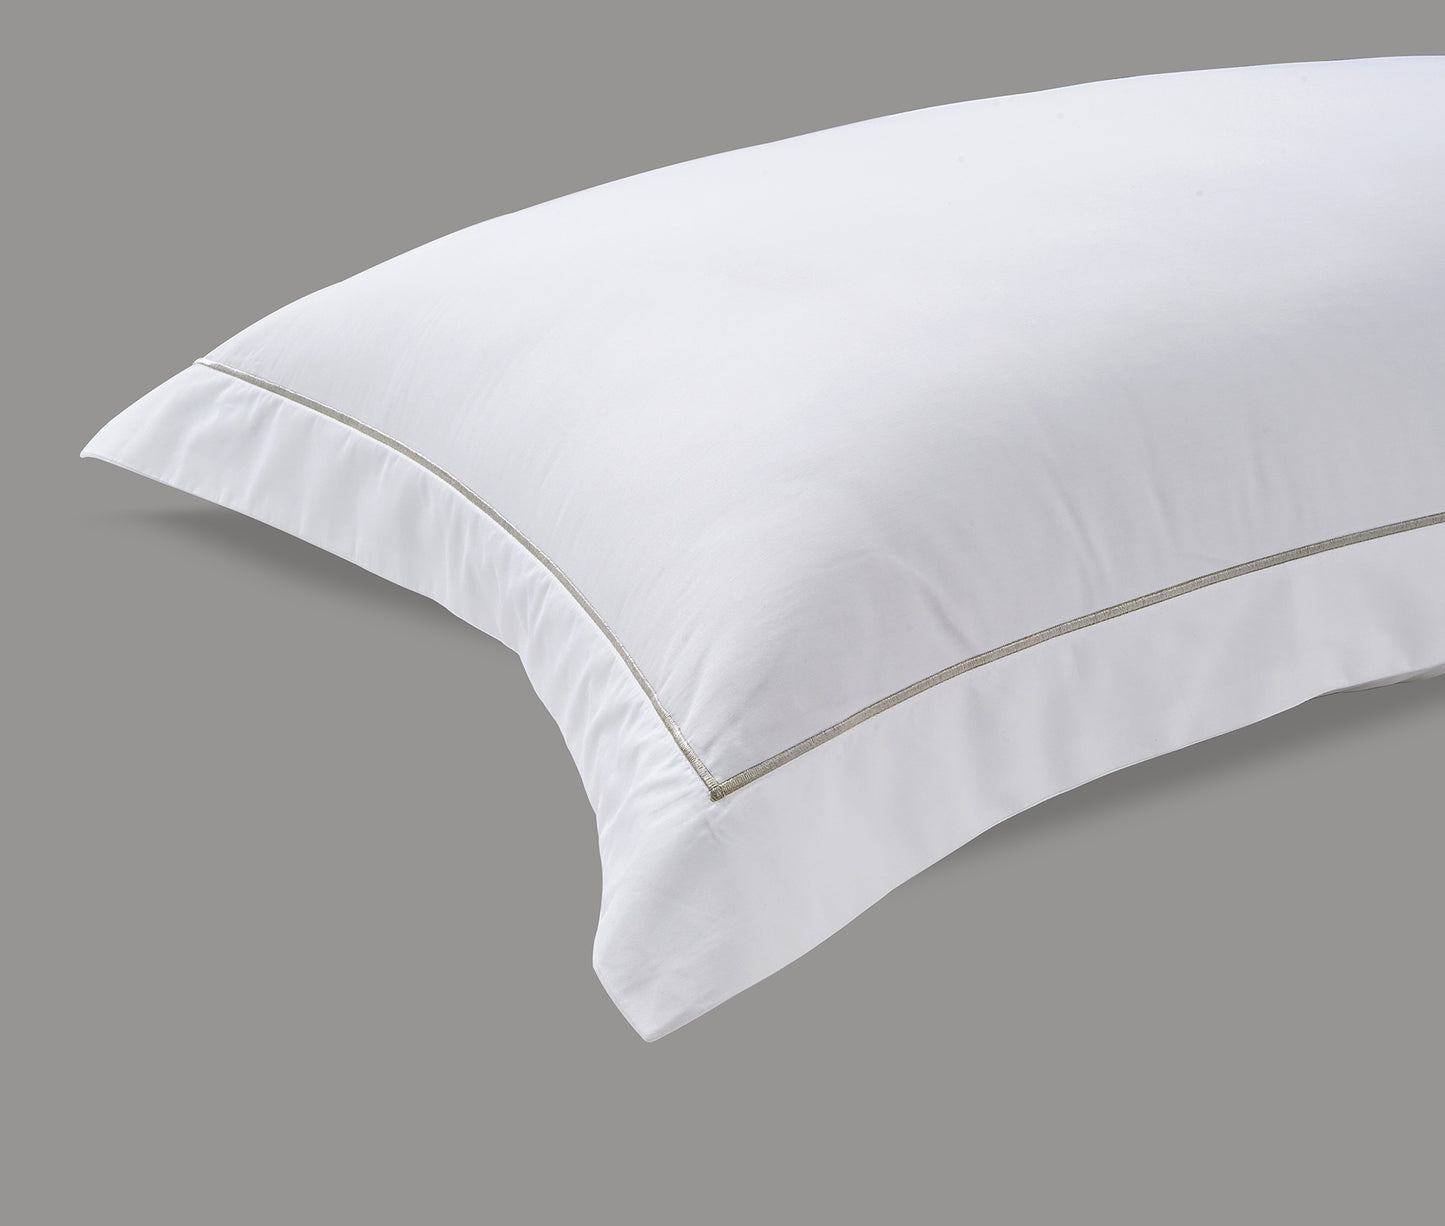 300 Thread Count Percale Pair of Oakwood Pillowcases - Mink